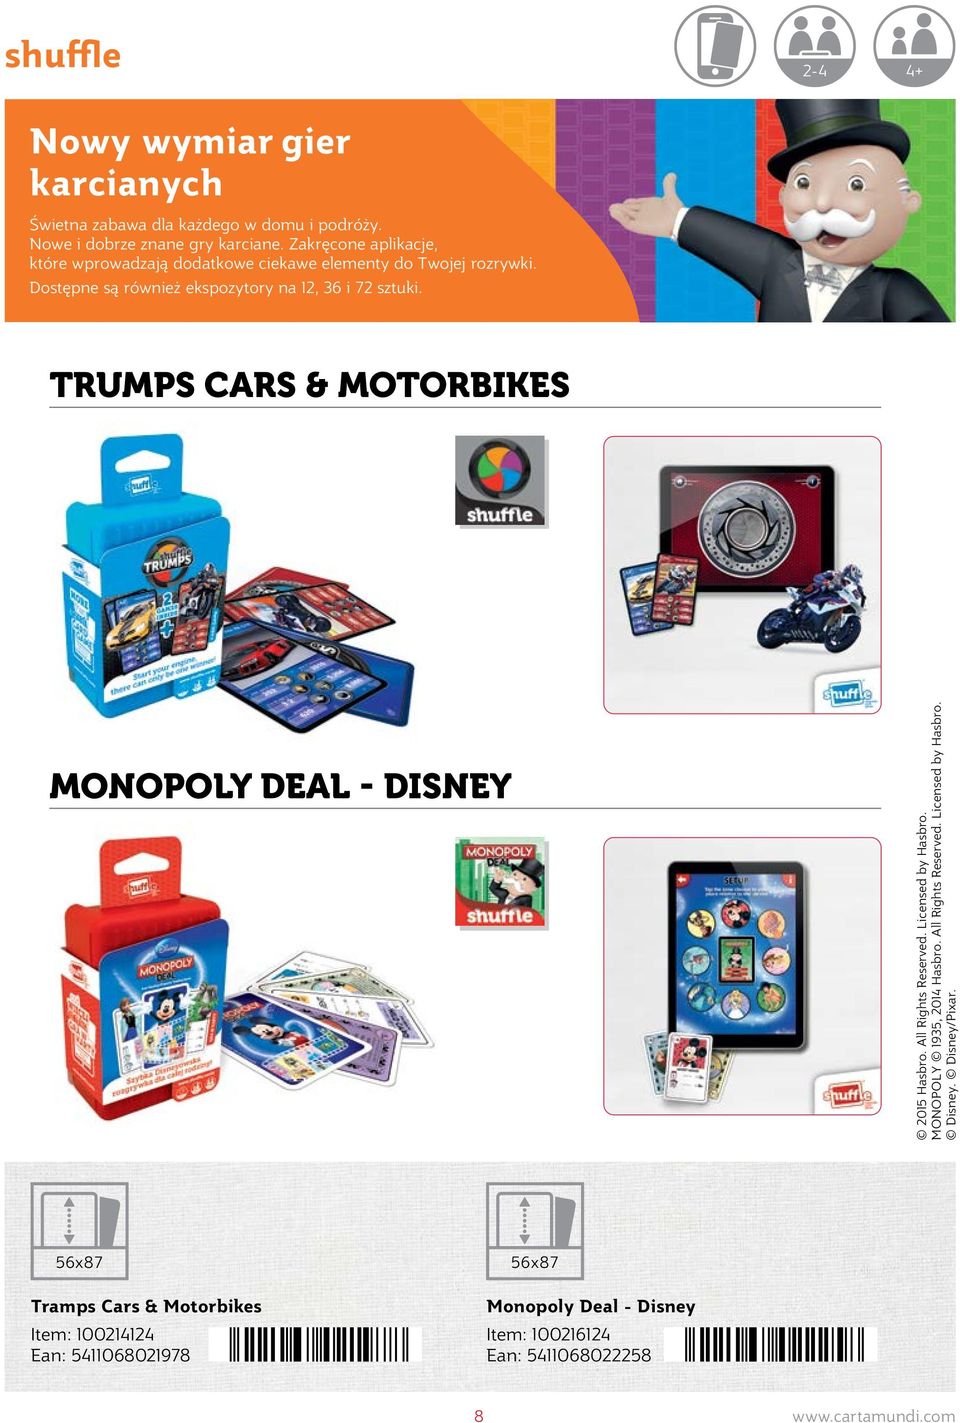 TRUMPS CARS & MOTORBIKES MONOPOLY DEAL - DISNEY 2015 Hasbro. All Rights Reserved. Licensed by Hasbro. MONOPOLY 1935, 2014 Hasbro. All Rights Reserved. Licensed by Hasbro. Disney.